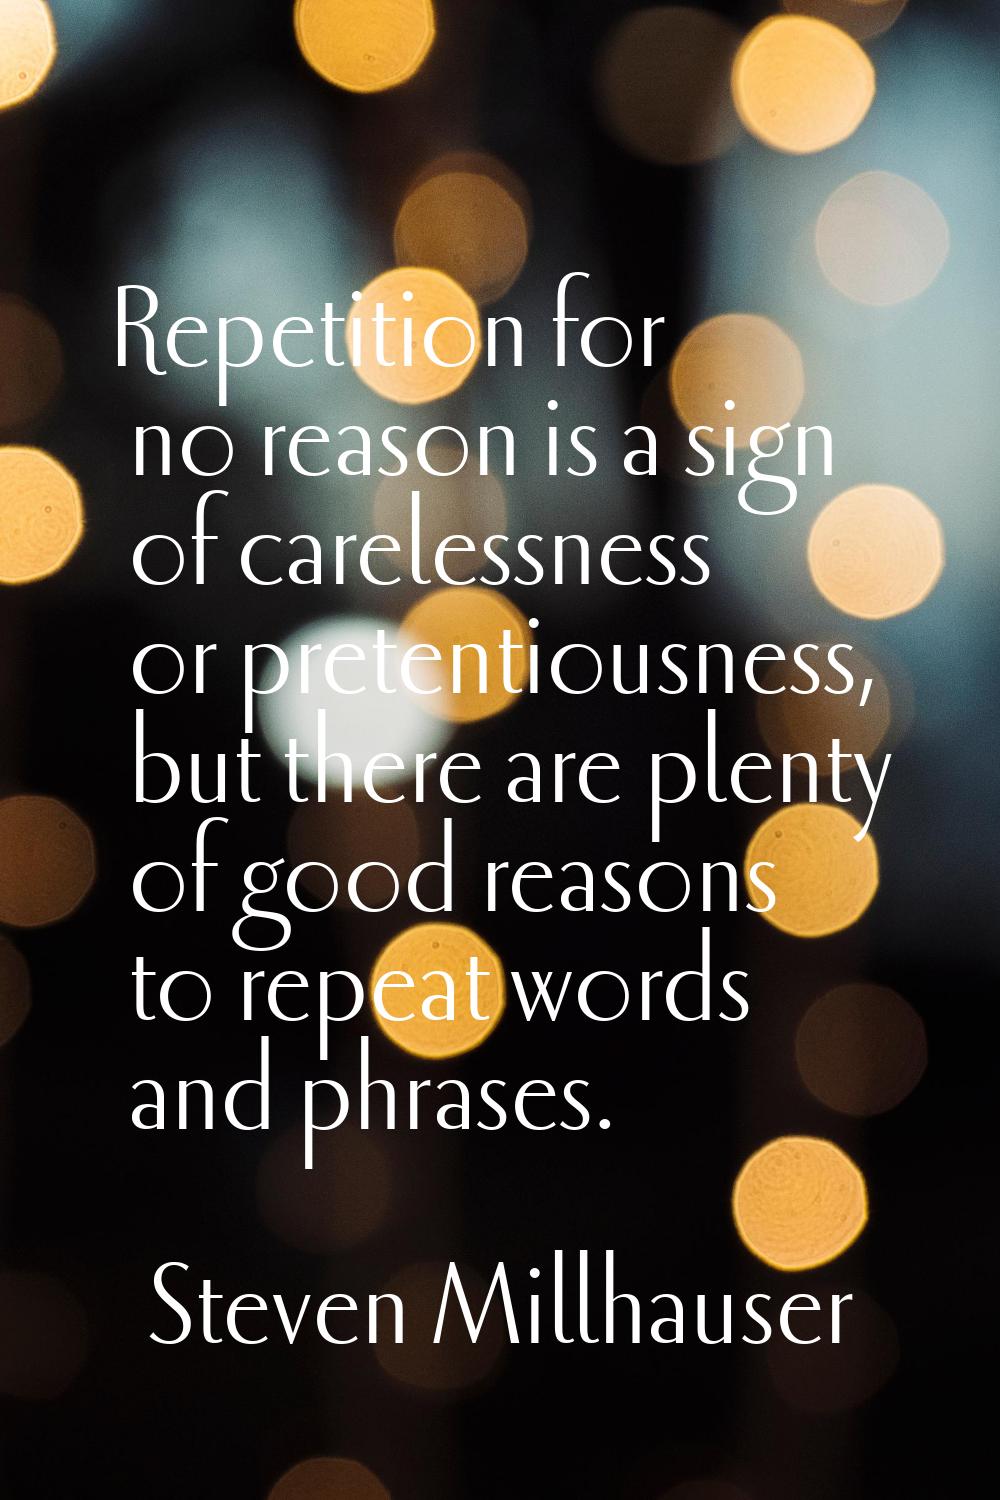 Repetition for no reason is a sign of carelessness or pretentiousness, but there are plenty of good